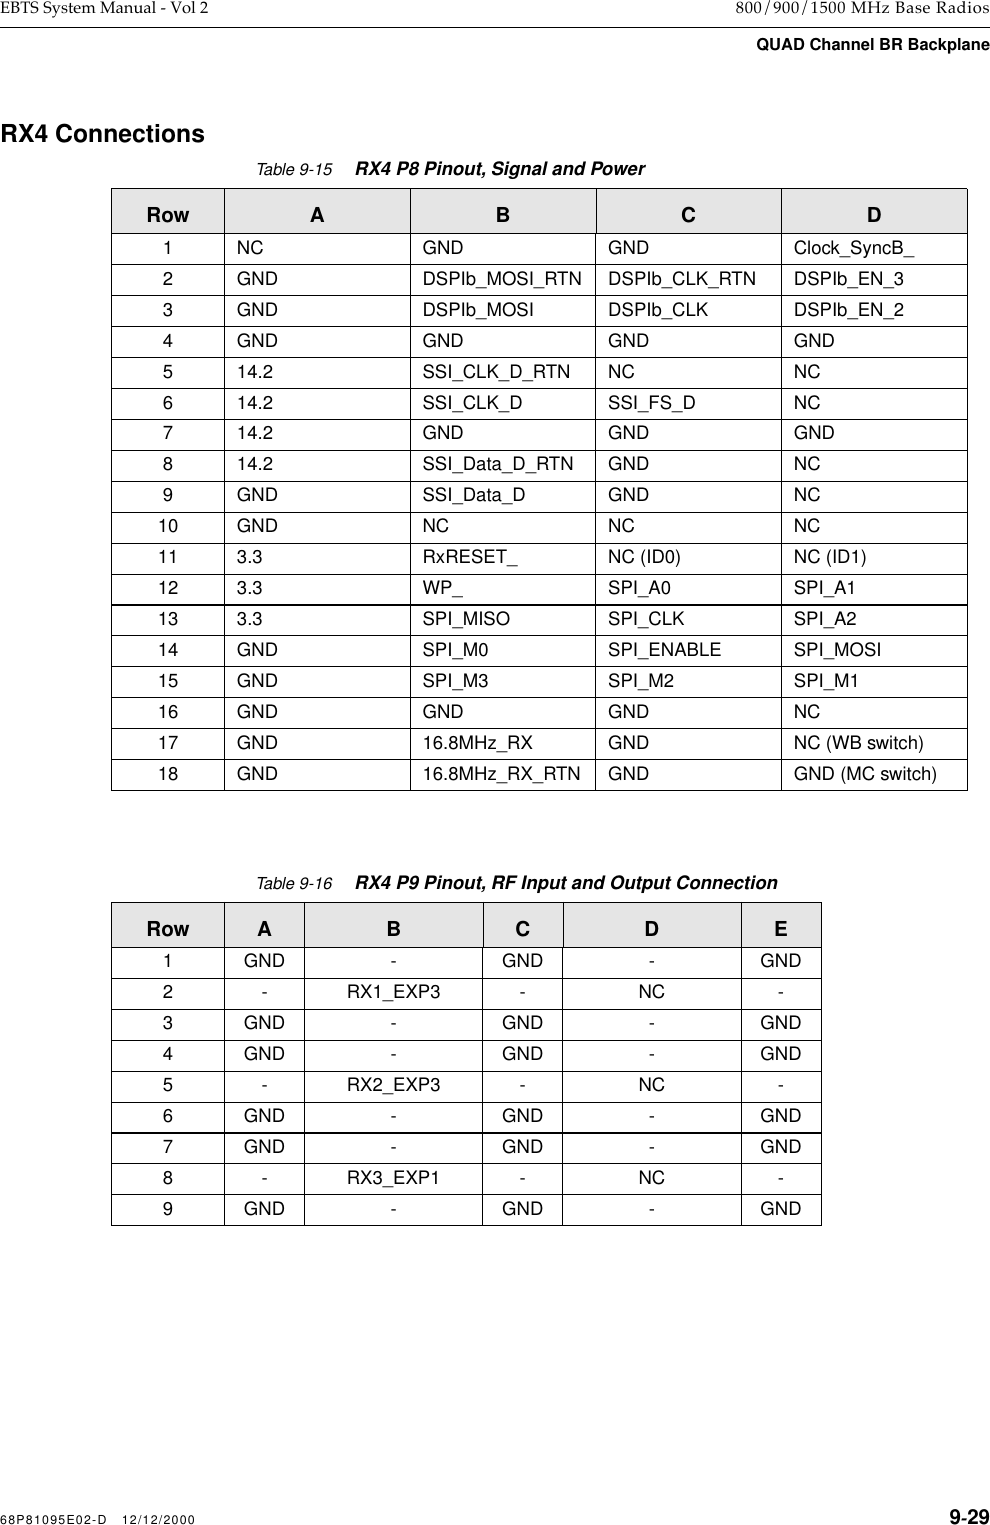 68P81095E02-D   12/12/2000 9-29EBTS System Manual - Vol 2 800/900/1500 MHz Base RadiosQUAD Channel BR BackplaneRX4 ConnectionsTable 9-15RX4 P8 Pinout, Signal and PowerRow A B C D1 NC GND GND Clock_SyncB_2 GND DSPIb_MOSI_RTN DSPIb_CLK_RTN DSPIb_EN_33 GND DSPIb_MOSI DSPIb_CLK DSPIb_EN_24 GND GND GND GND5 14.2 SSI_CLK_D_RTN NC NC6 14.2 SSI_CLK_D SSI_FS_D NC7 14.2 GND GND GND8 14.2 SSI_Data_D_RTN GND NC9 GND SSI_Data_D GND NC10 GND NC NC NC11 3.3 RxRESET_ NC (ID0) NC (ID1)12 3.3 WP_ SPI_A0 SPI_A113 3.3 SPI_MISO SPI_CLK SPI_A214 GND SPI_M0 SPI_ENABLE SPI_MOSI15 GND SPI_M3 SPI_M2 SPI_M116 GND GND GND NC17 GND 16.8MHz_RX GND NC (WB switch)18 GND 16.8MHz_RX_RTN GND GND (MC switch)Table 9-16RX4 P9 Pinout, RF Input and Output ConnectionRow A B C D E1 GND - GND - GND2 - RX1_EXP3 - NC -3 GND - GND - GND4 GND - GND - GND5 - RX2_EXP3 - NC -6 GND - GND - GND7 GND - GND - GND8 - RX3_EXP1 - NC -9 GND - GND - GND